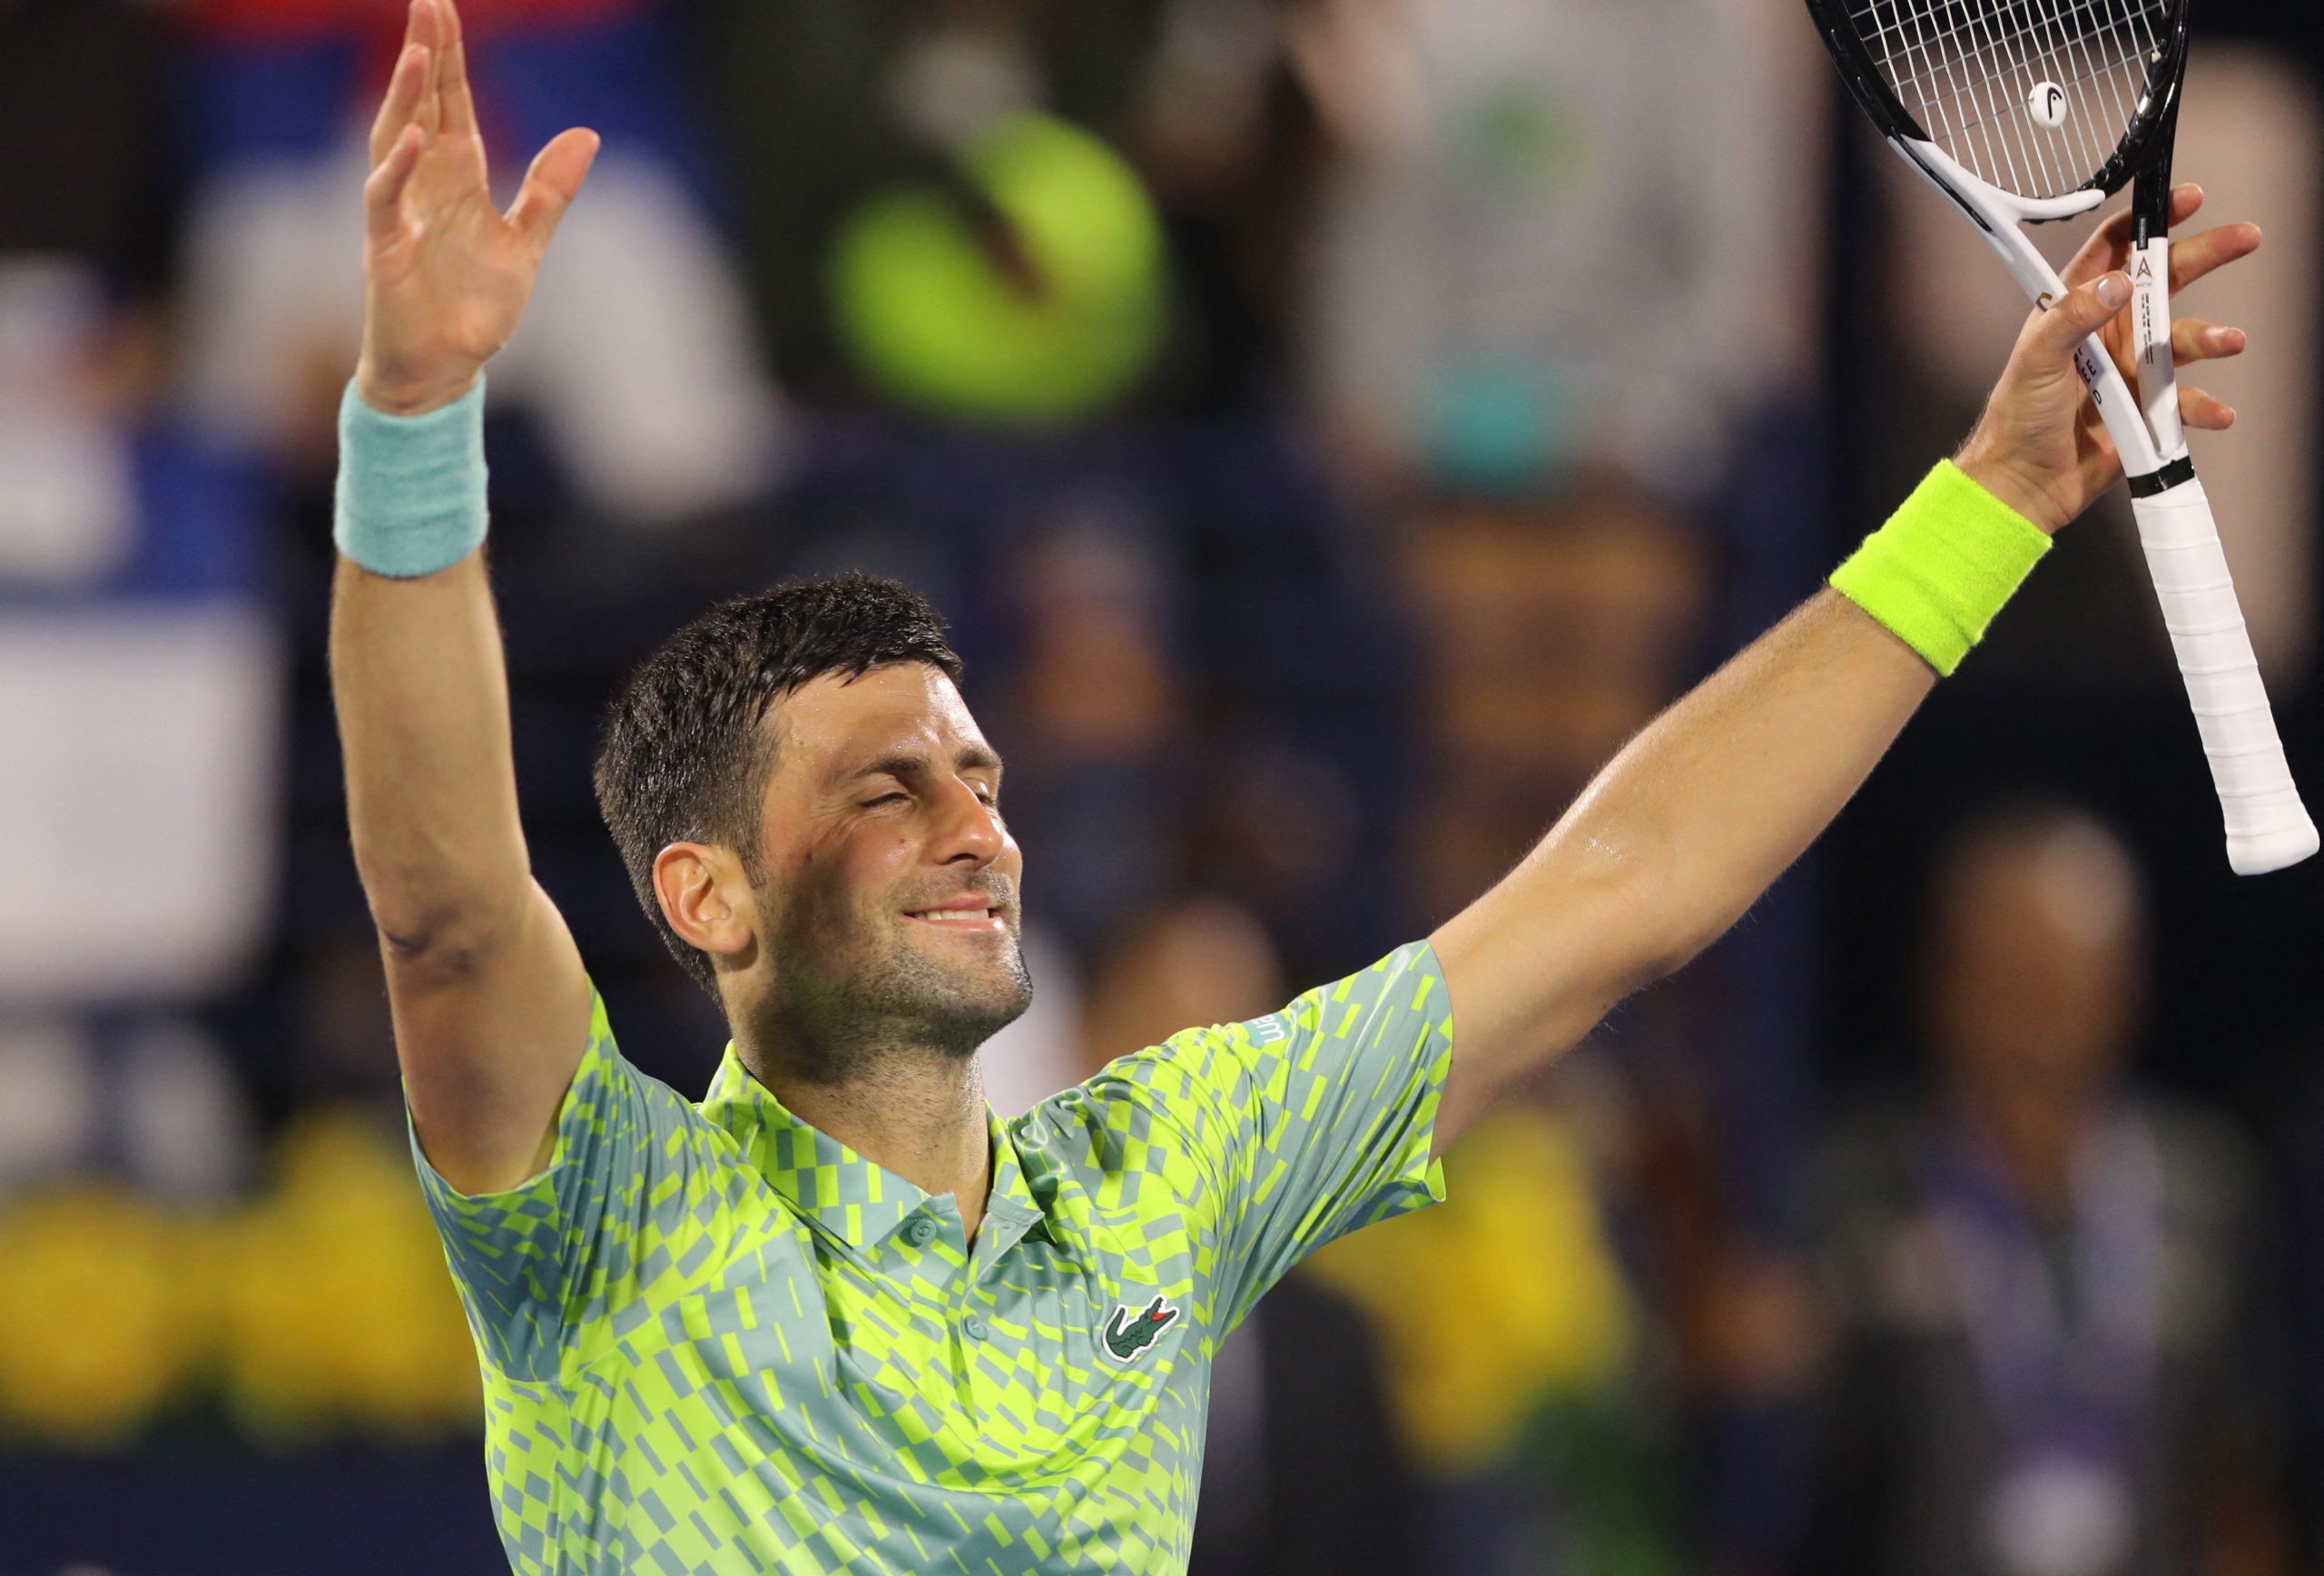 Novak Djokovic stays on course for his third title of 2023 by powering into the semi-finals of the Dubai Tennis Championships with a 6-3 7-5 win over Hubert Hurkacz